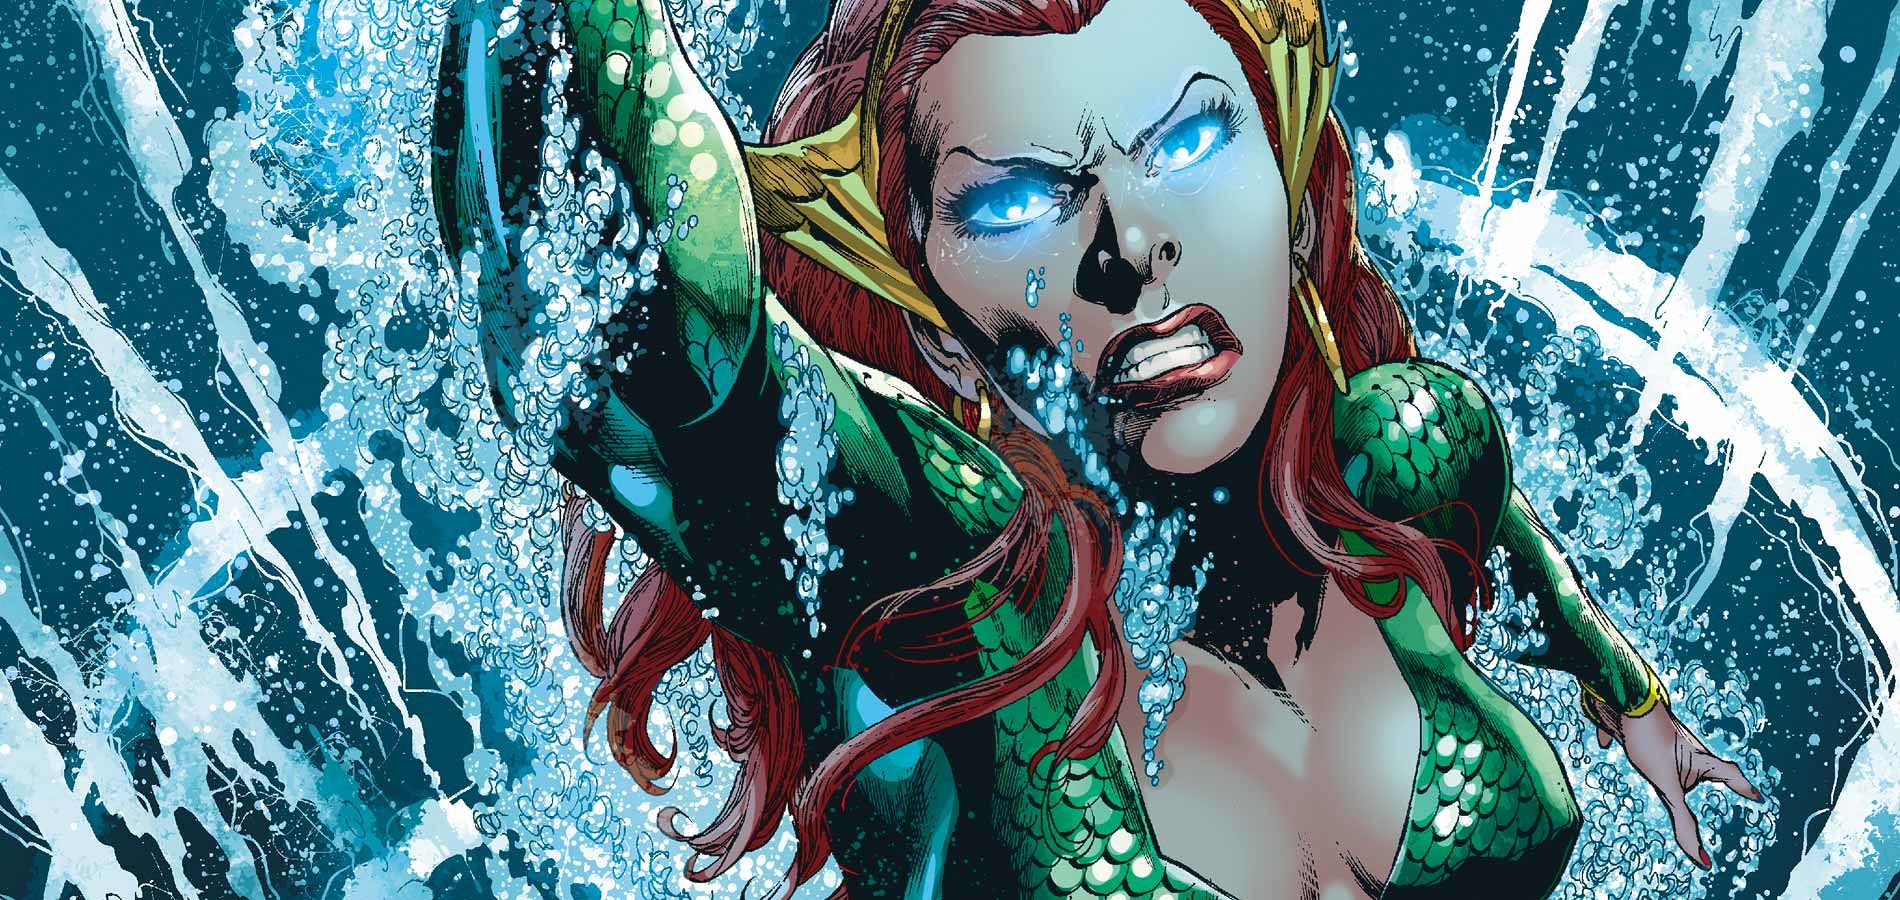 Mera - a player in the DC Expanded Universe